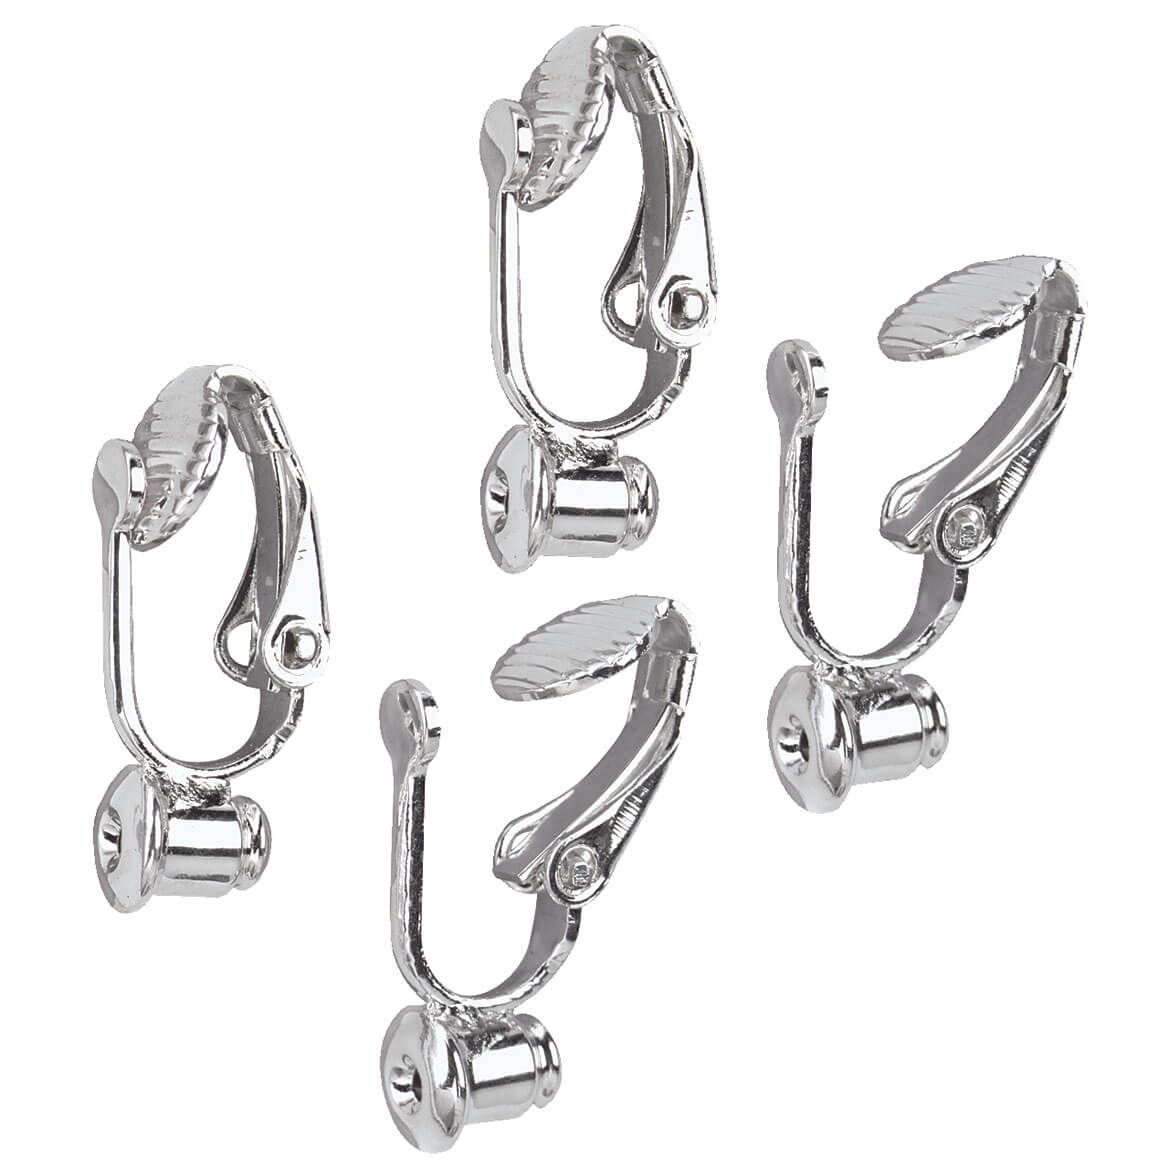 How to Adjust Your Clip-On Earrings